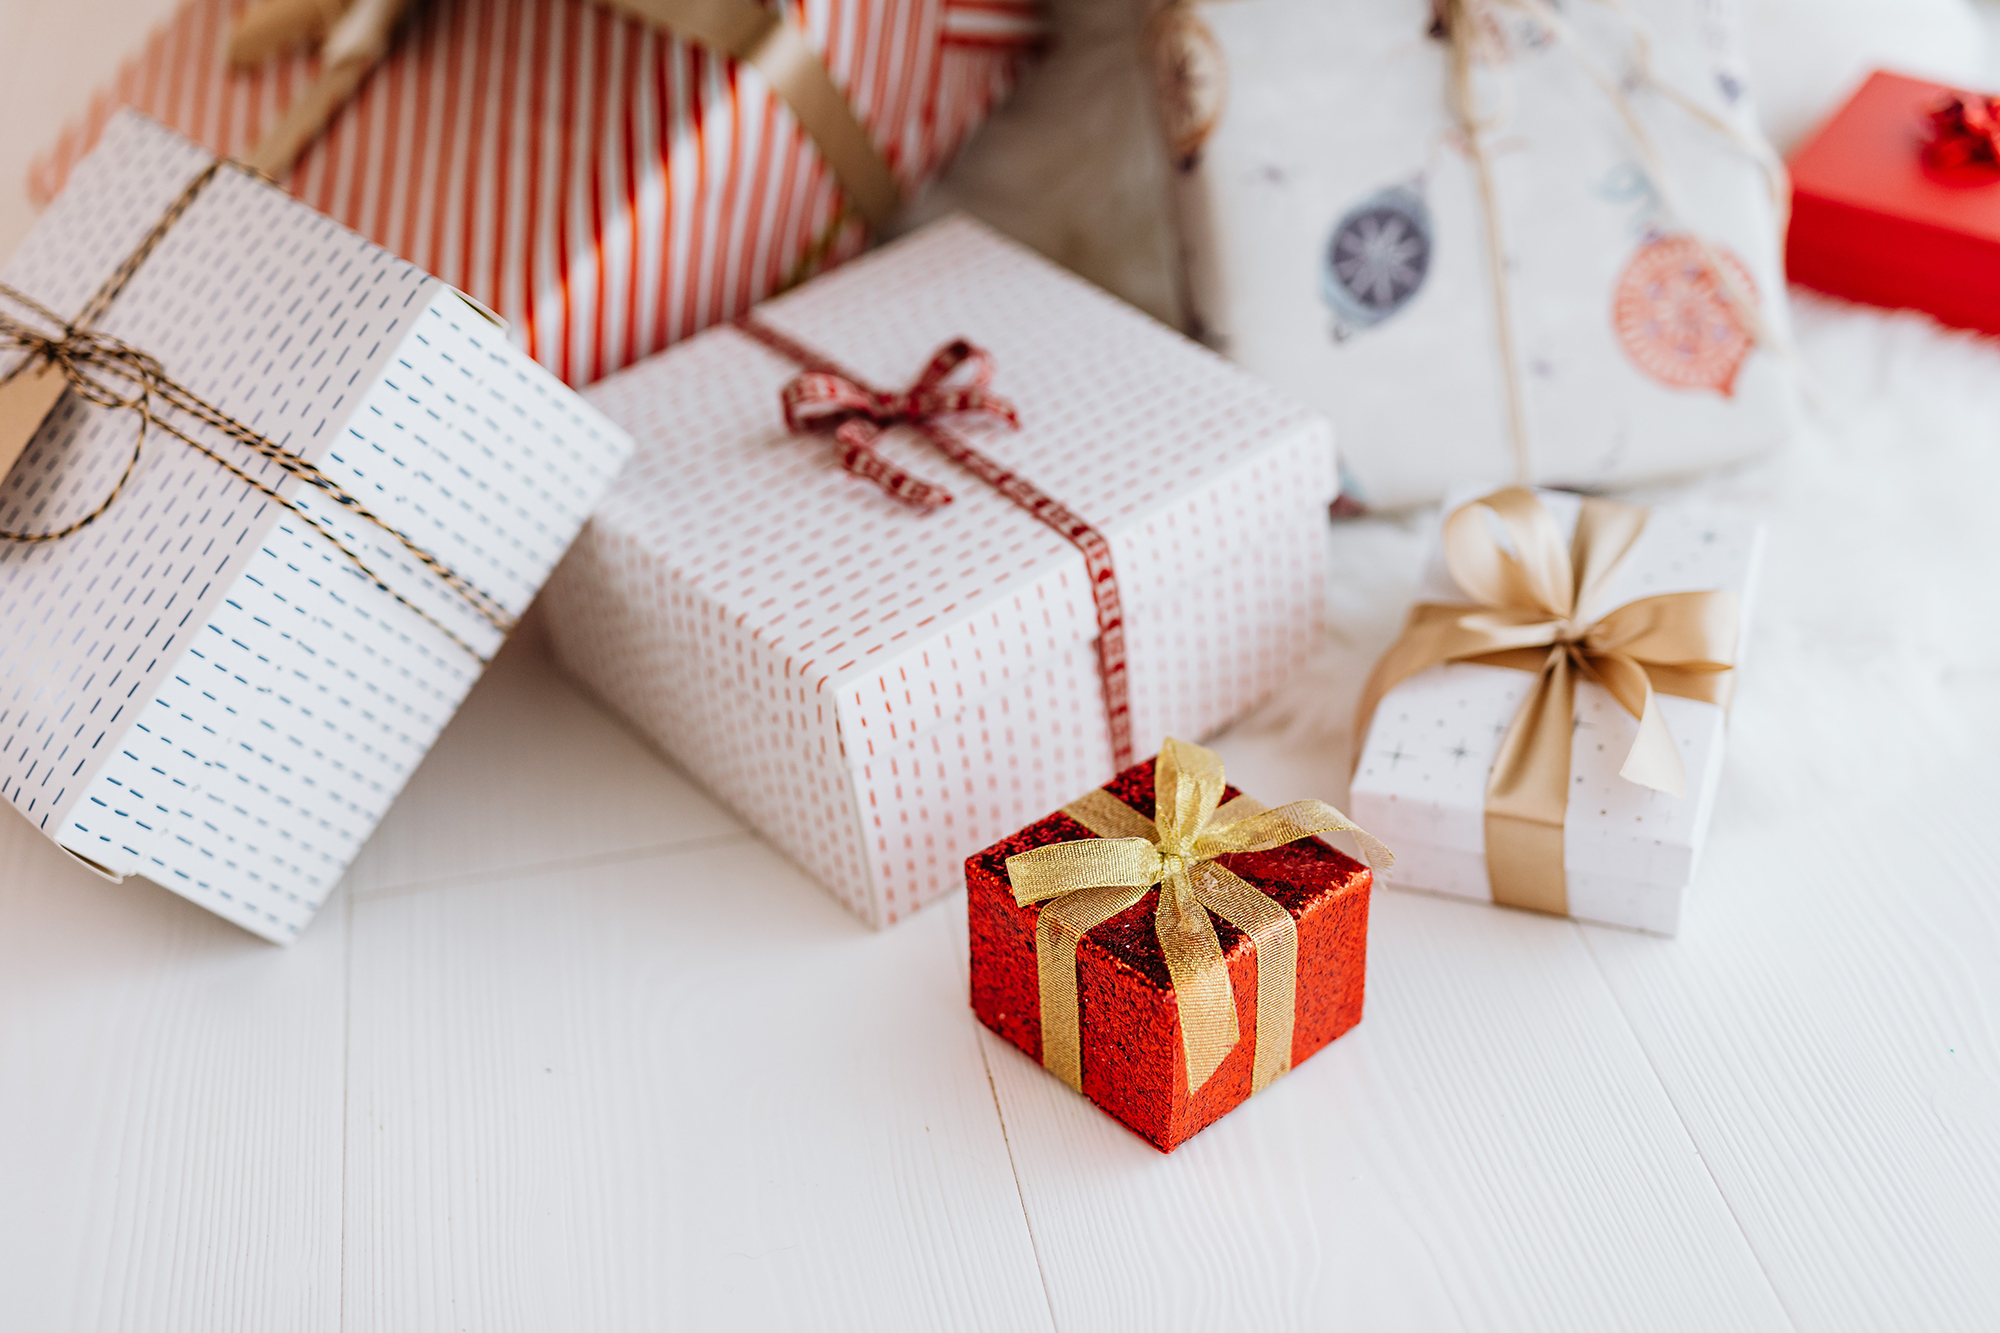 wrapped gifts in all shapes and sizes